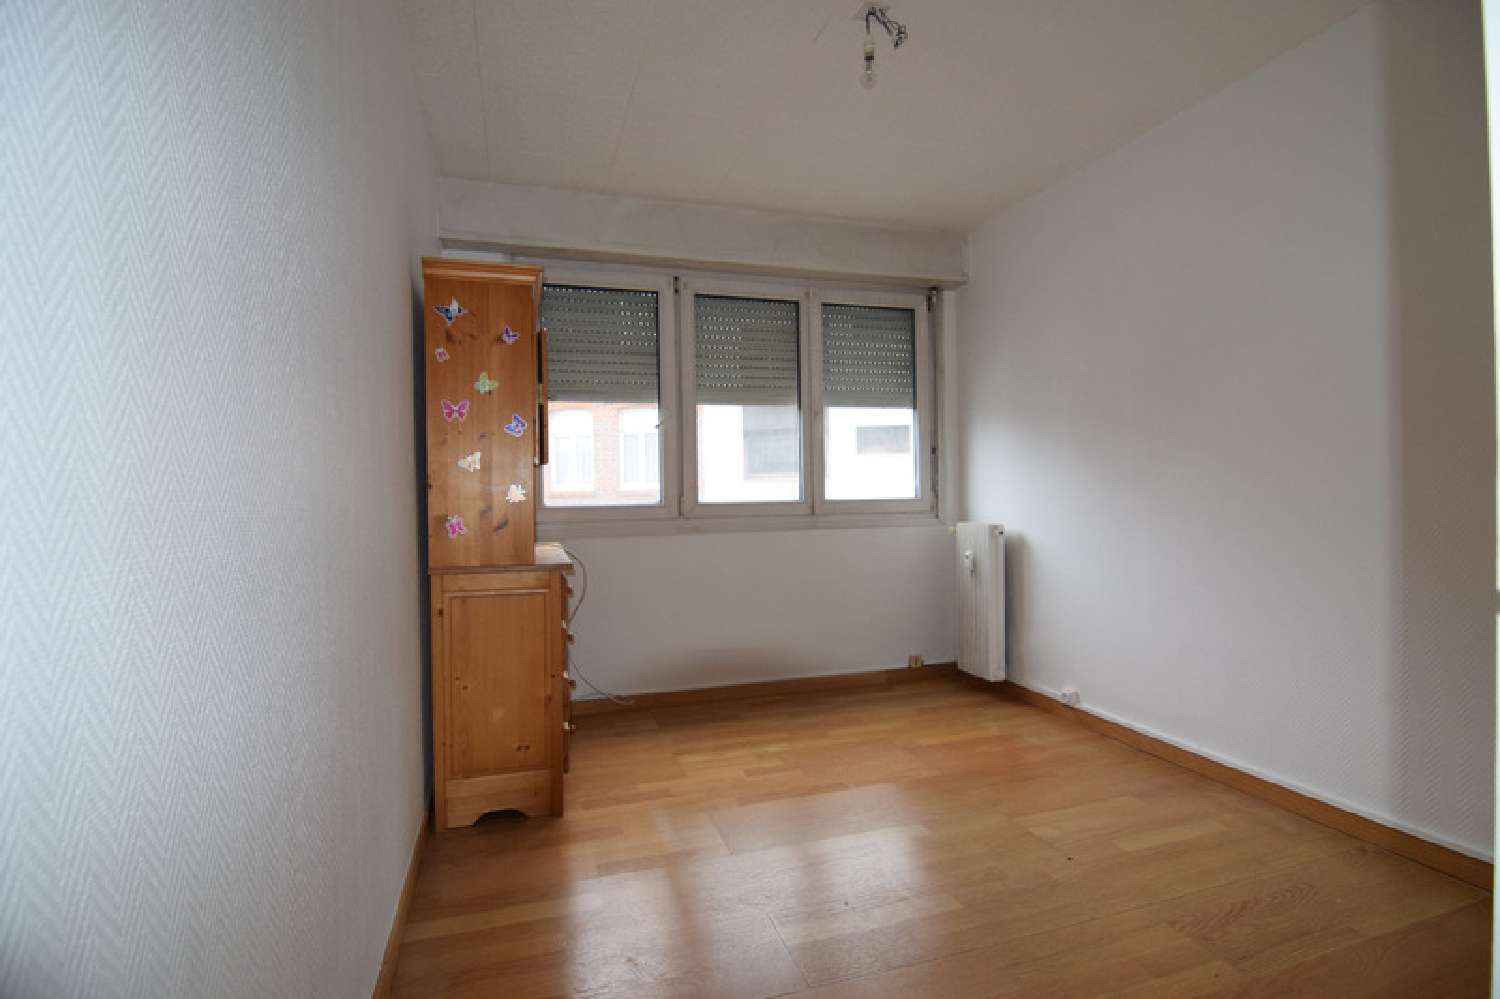  kaufen Wohnung/ Apartment Fâches-Thumesnil Nord 7